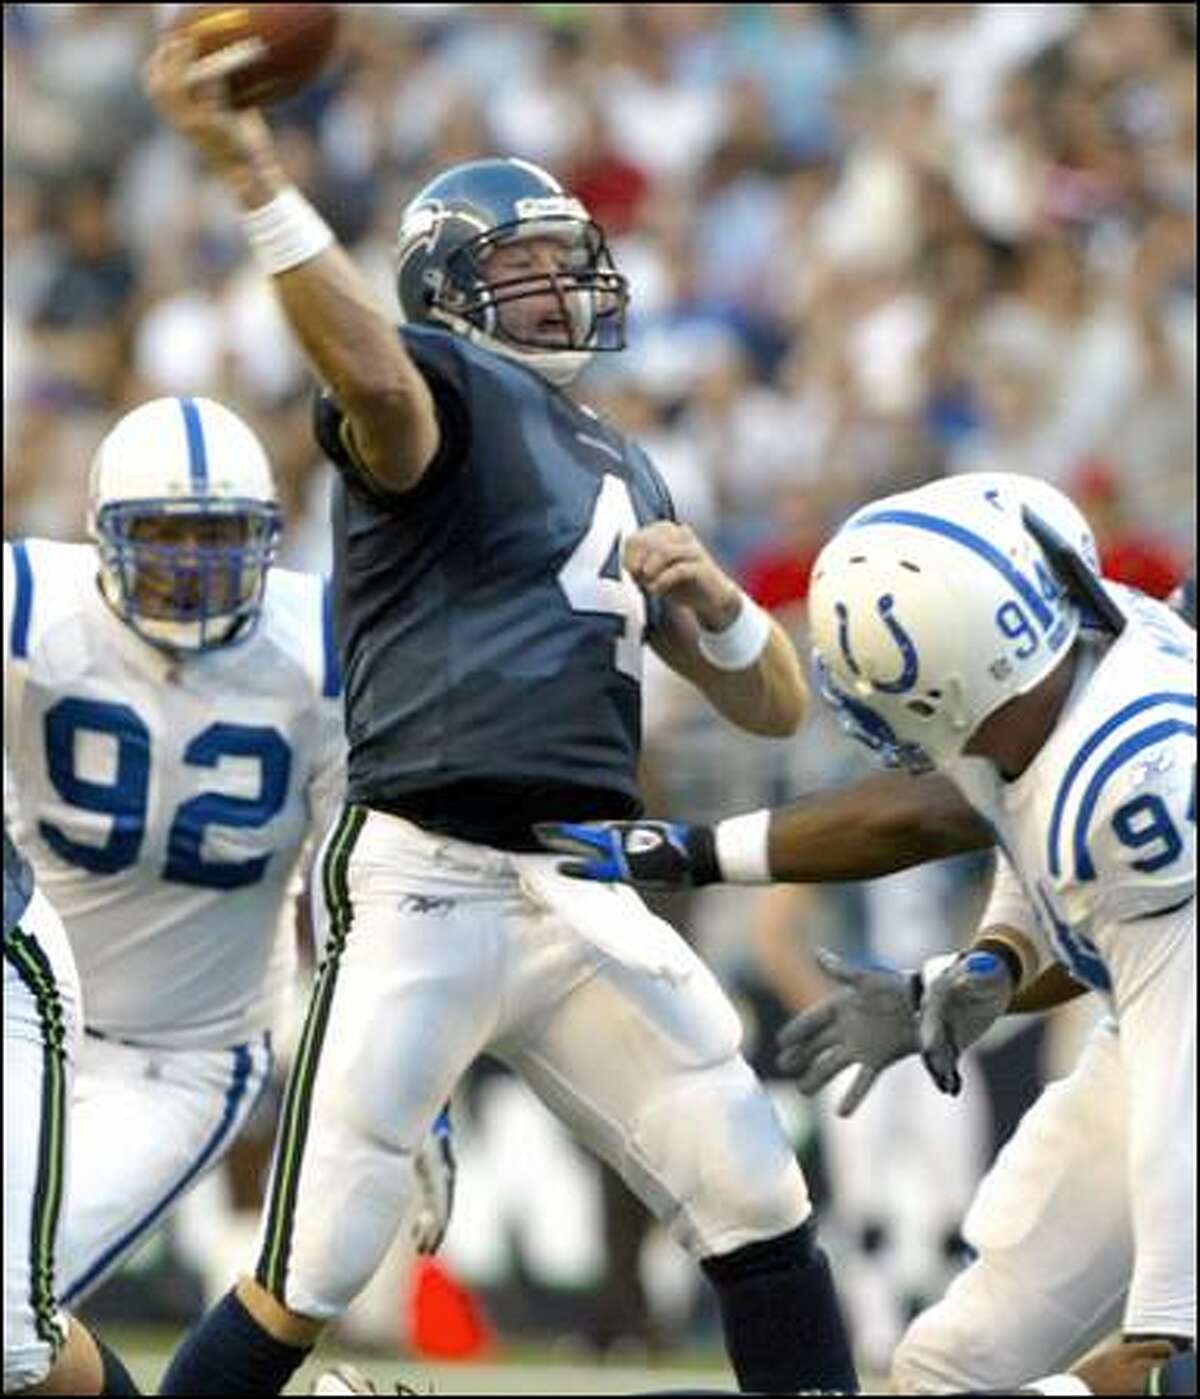 Trent Dilfer throws a pass in the first quarter before his injury.